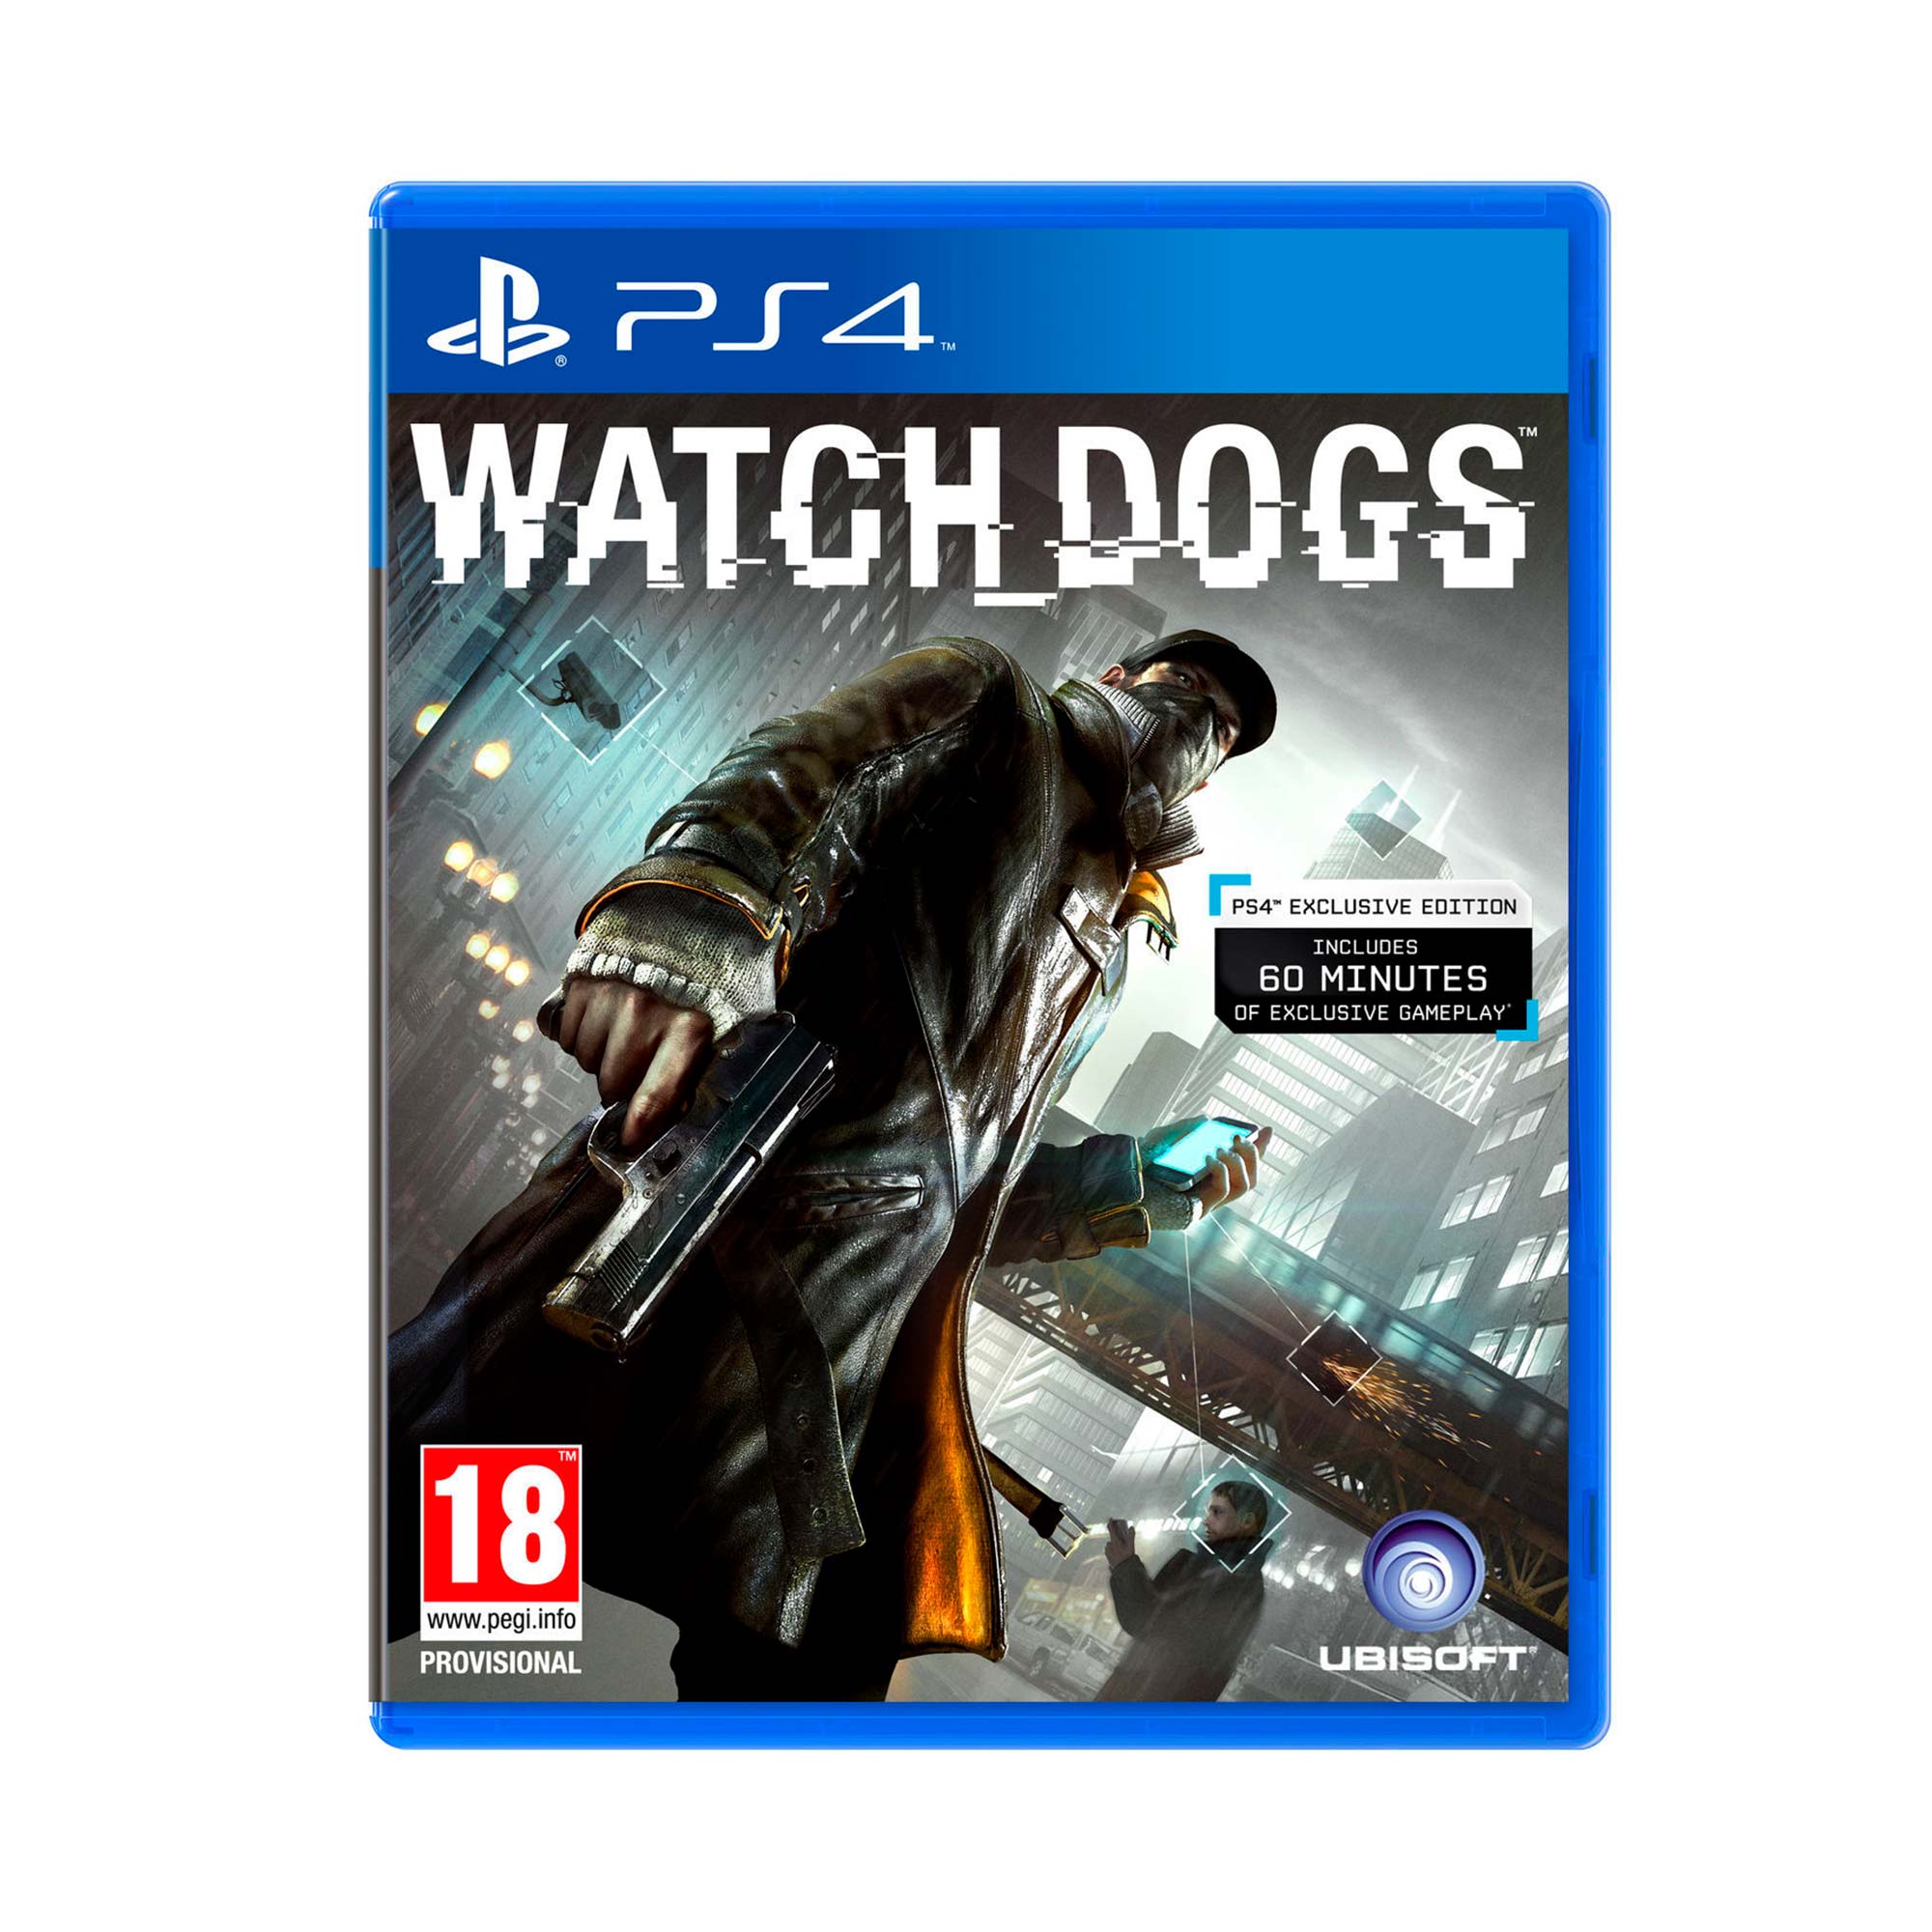 Juego PS4 Watch Dogs - Style Store